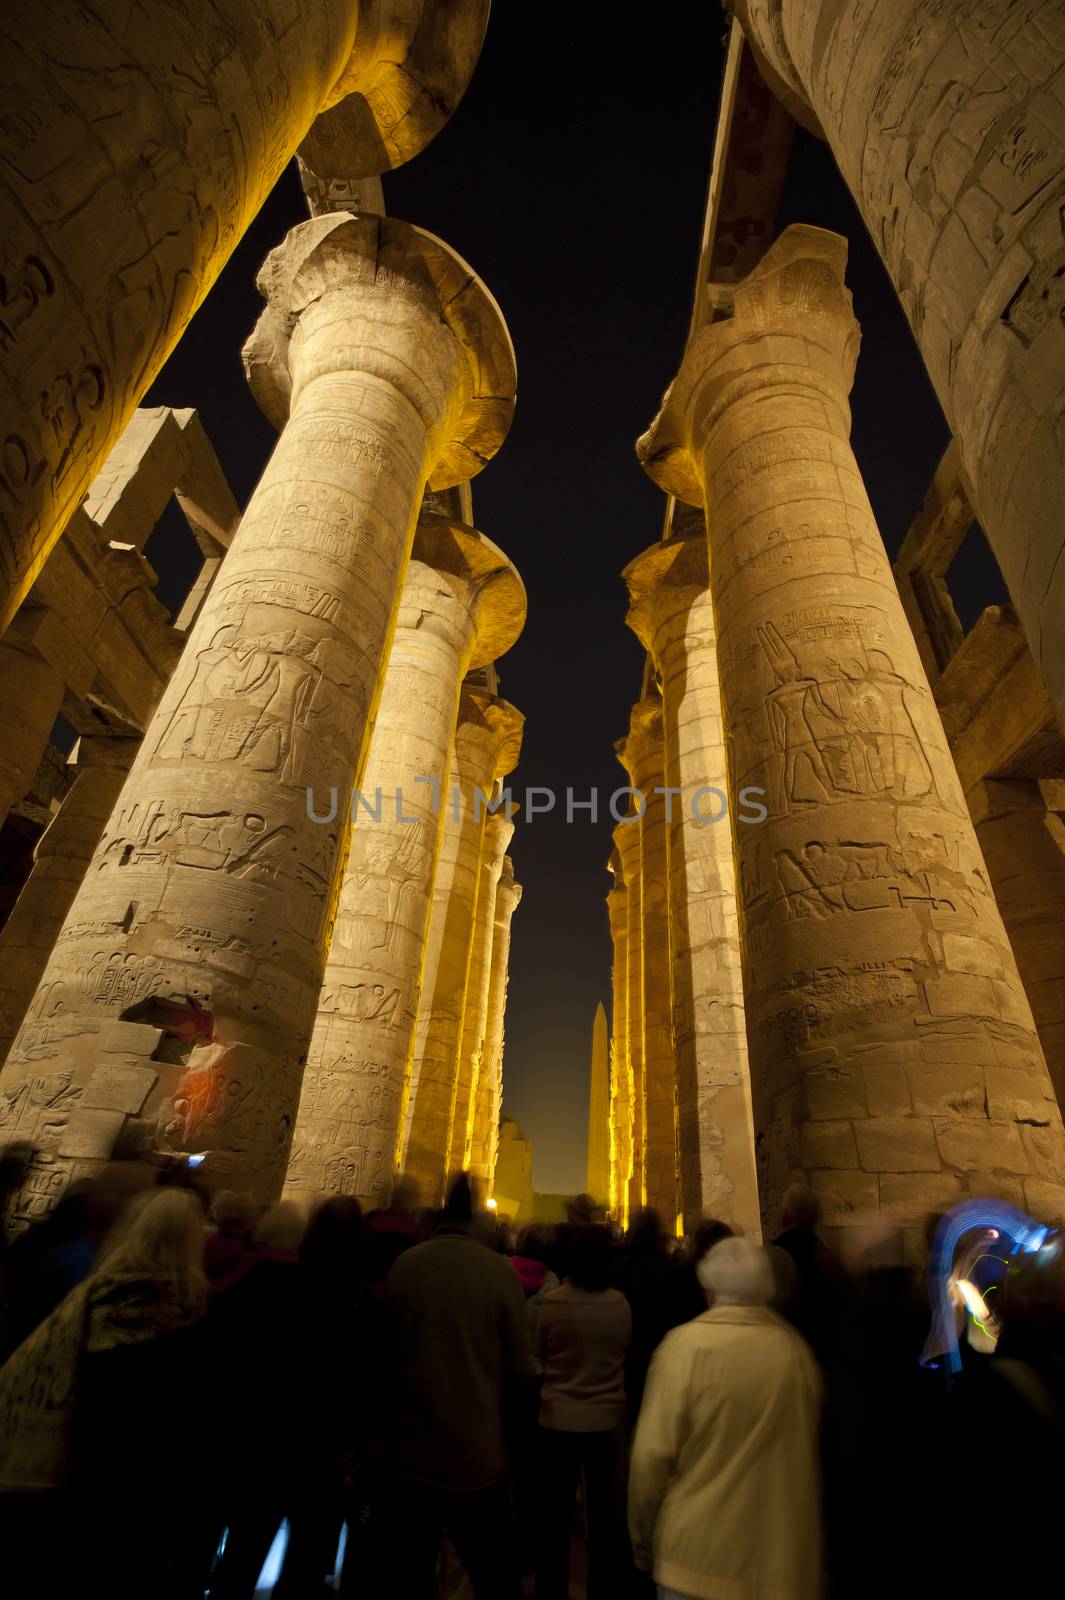 Columns in an ancient egyptian temple at night by paulvinten